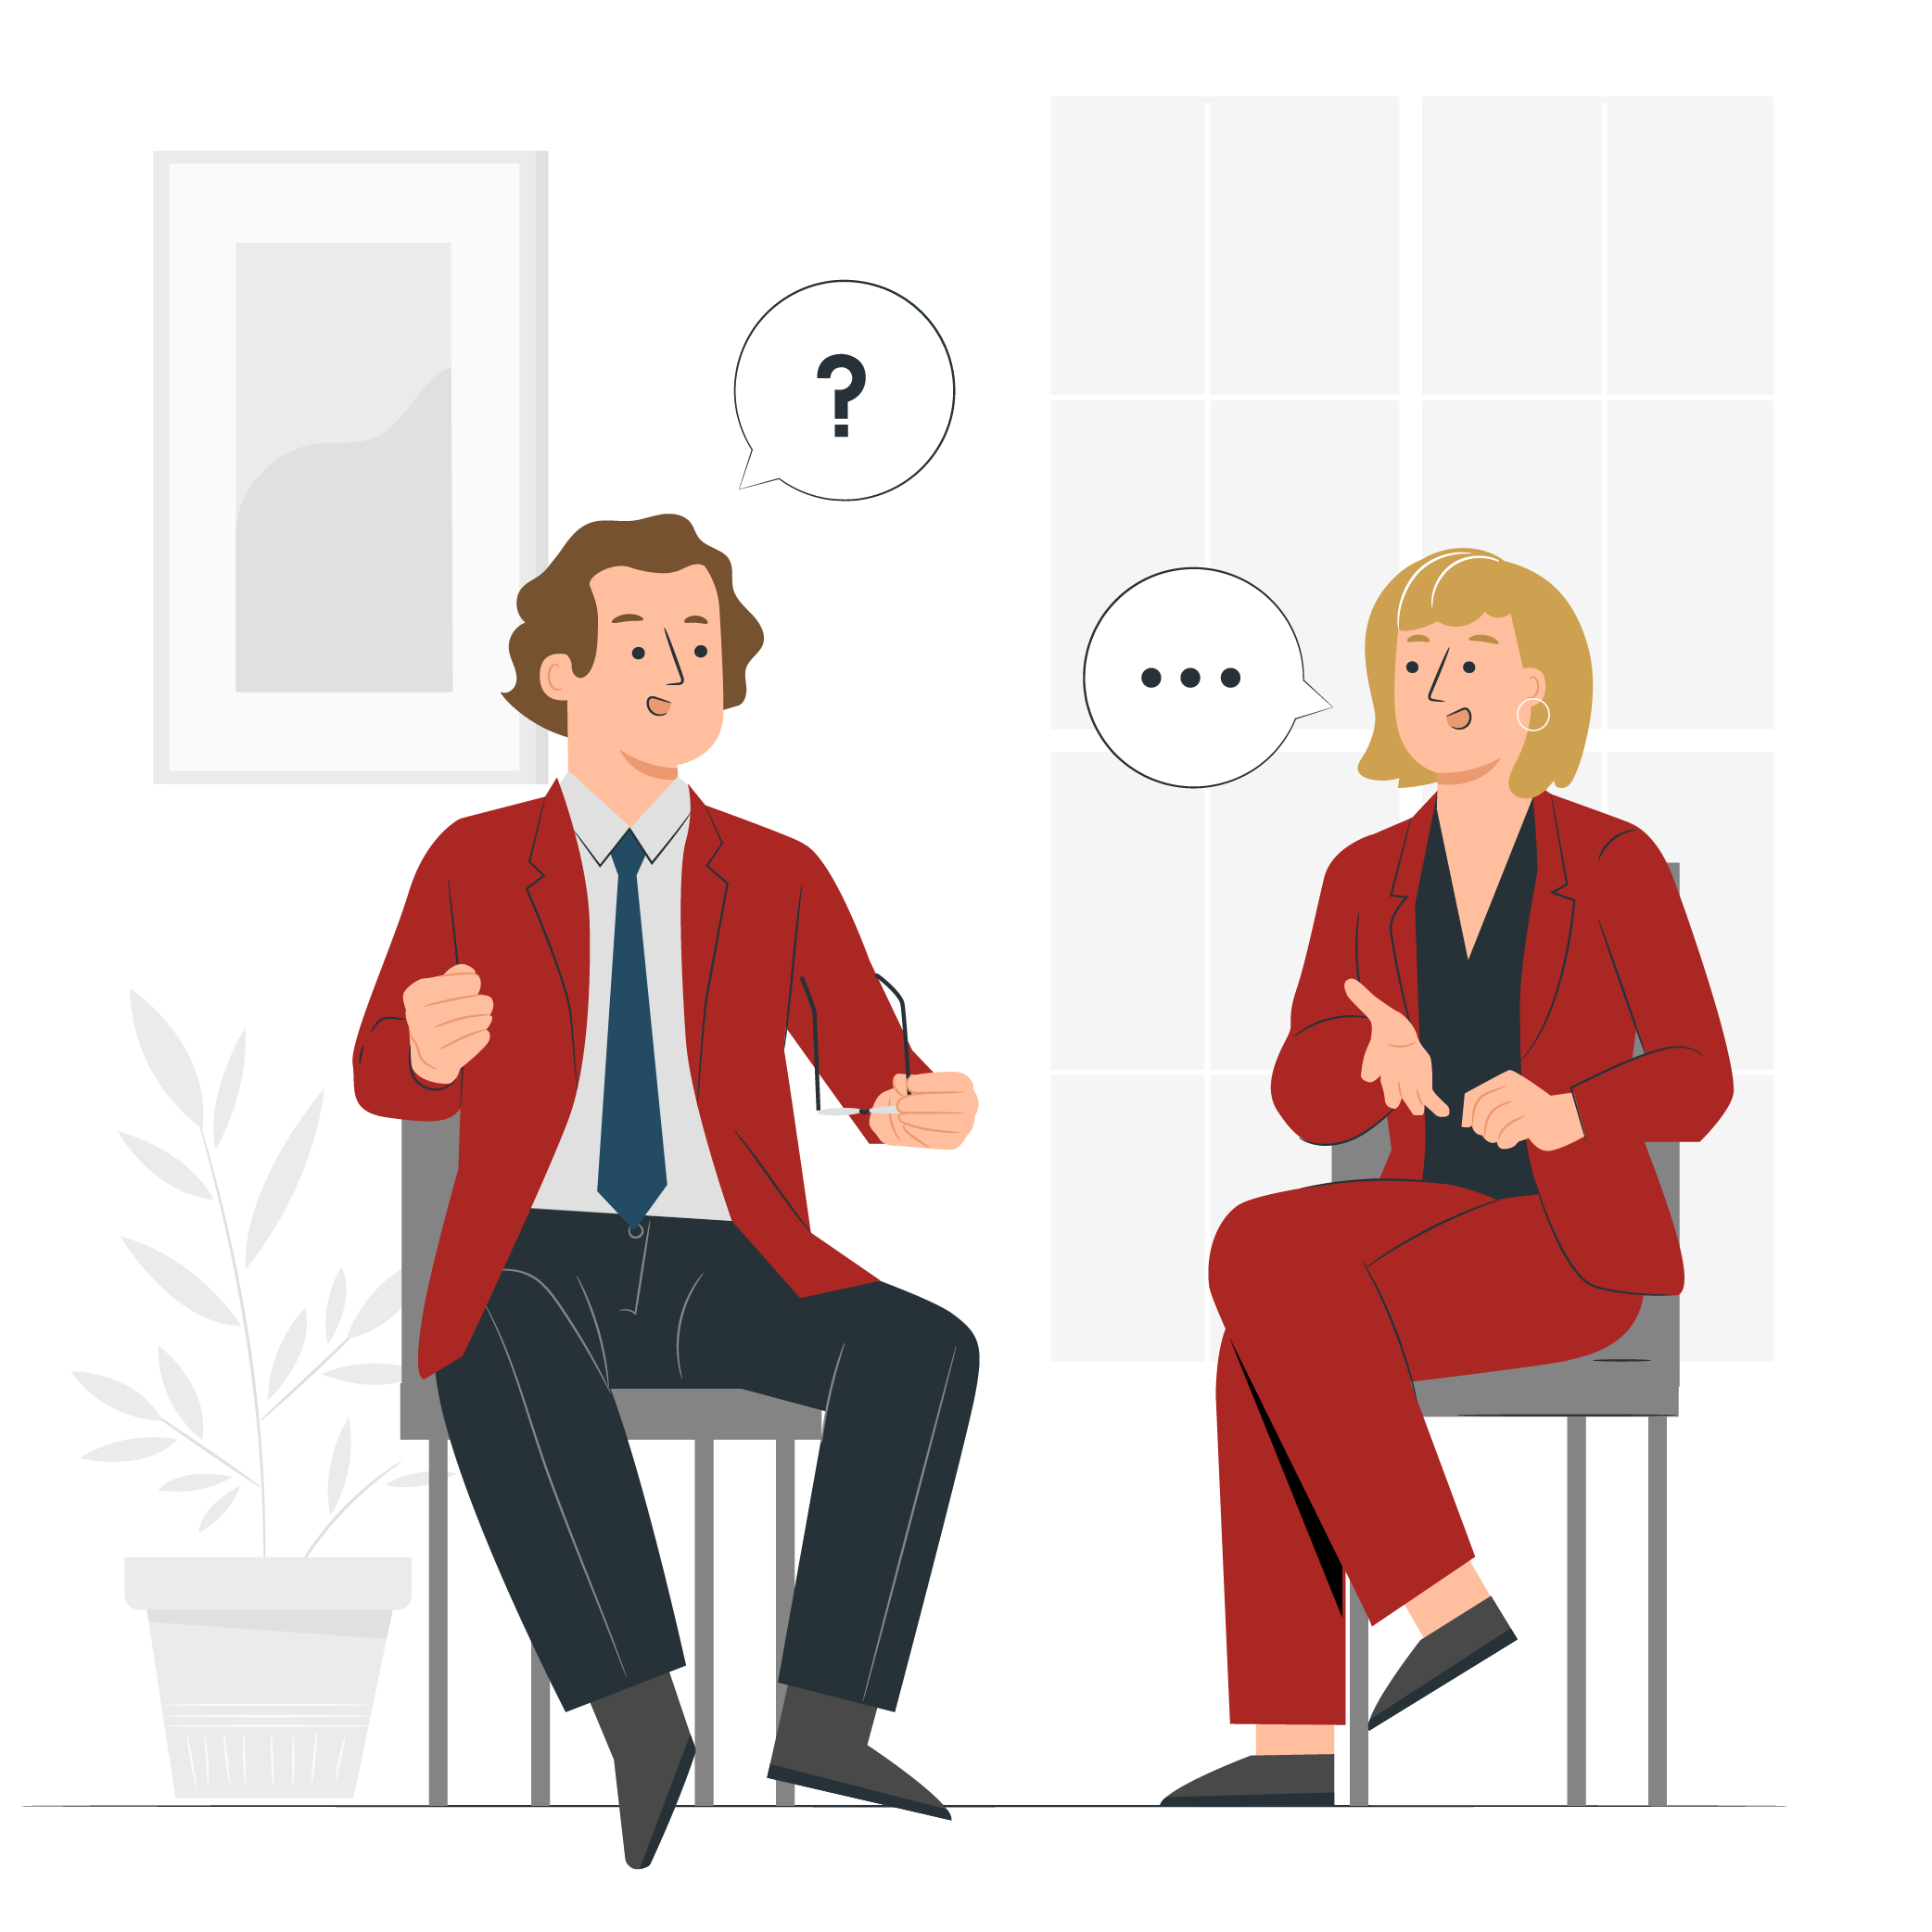 Illustration of a confused man sitting down talk to a woman therapist about his problems. Focused therapy.